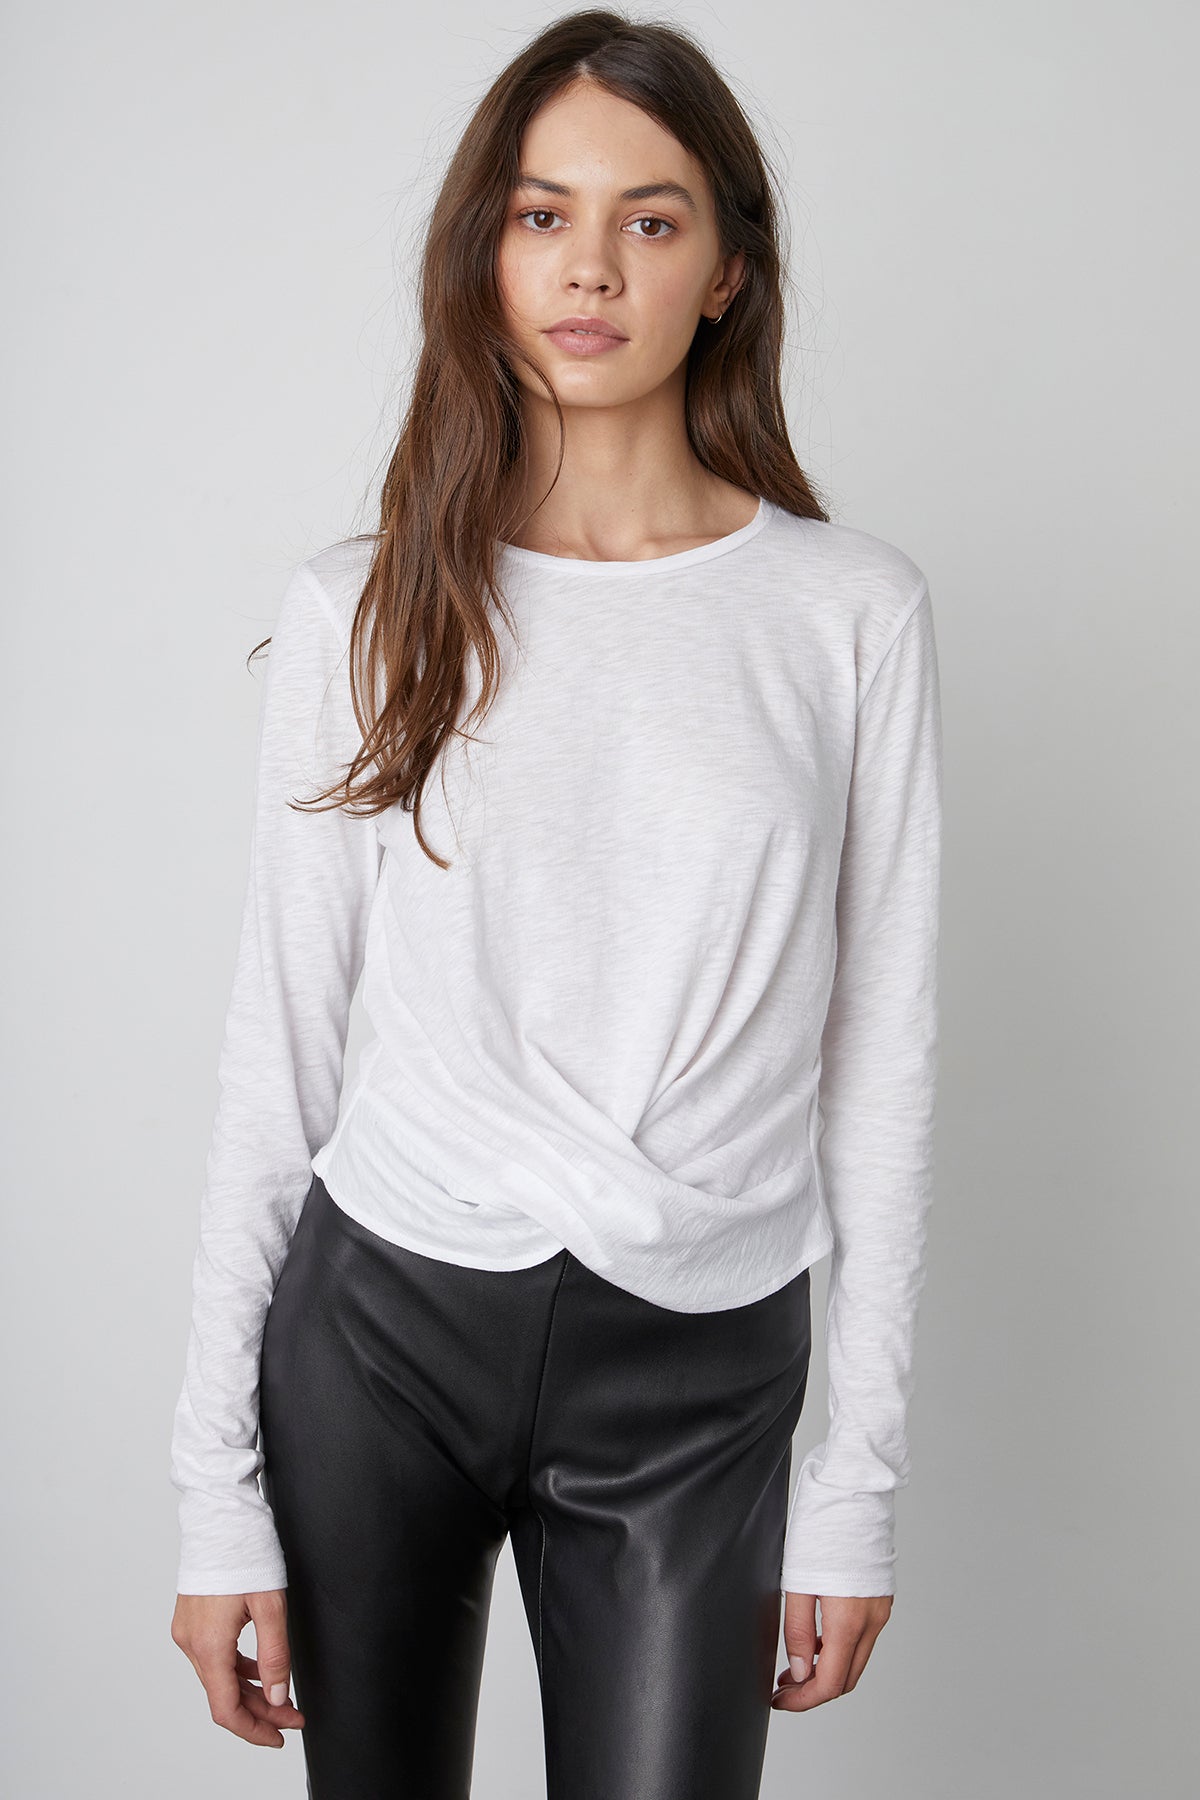 The model is wearing a Velvet by Graham & Spencer BEATRICE FRONT TWIST TEE and black leather pants, giving her outfit a relaxed yet feminine appeal.-23119086584001